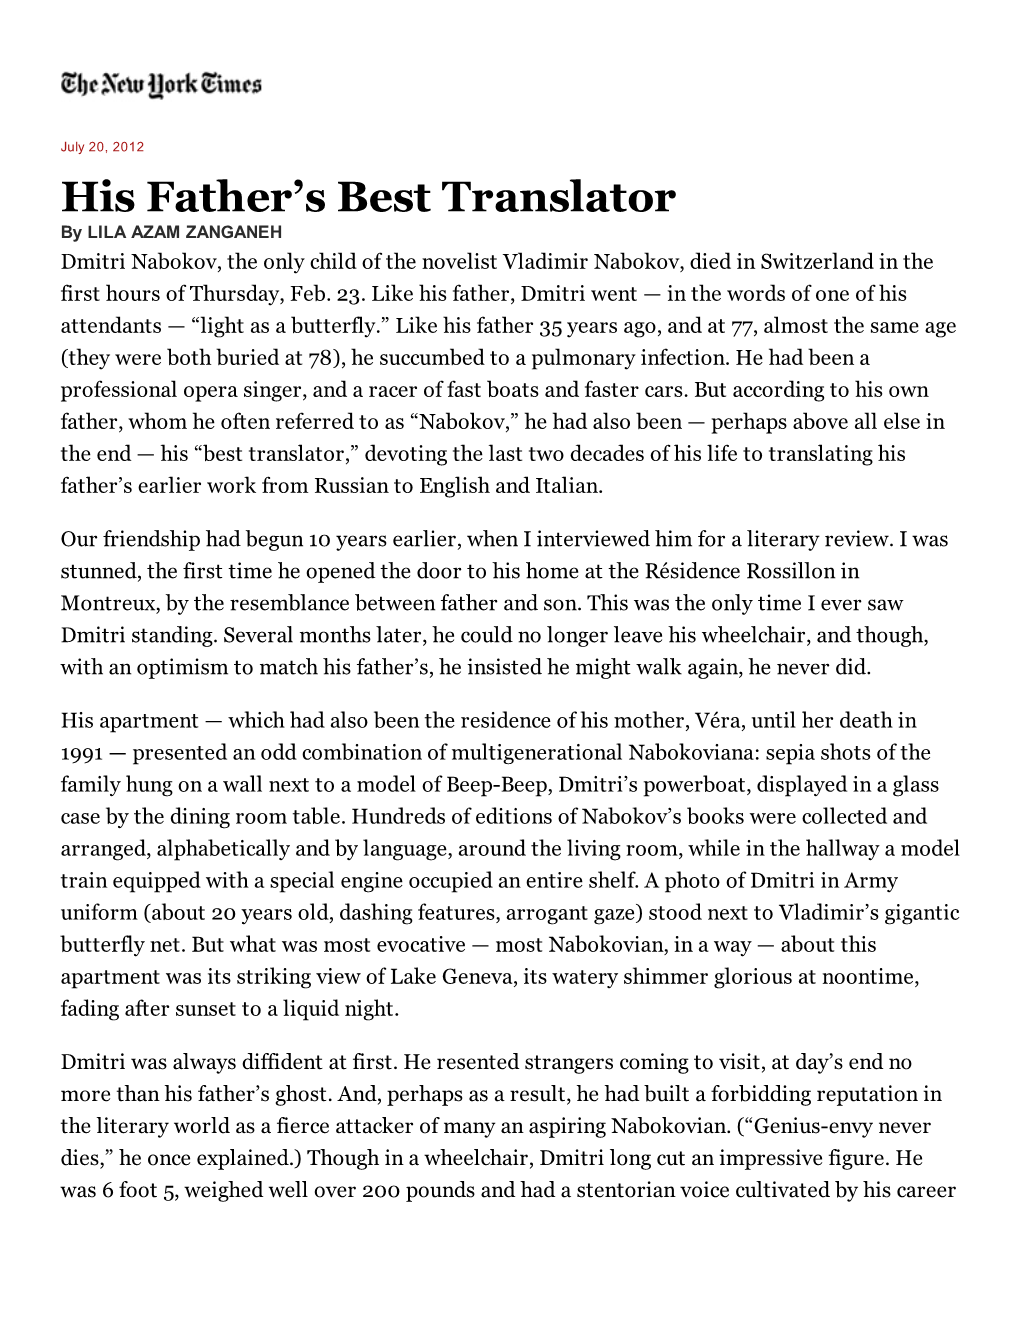 His Father's Best Translator